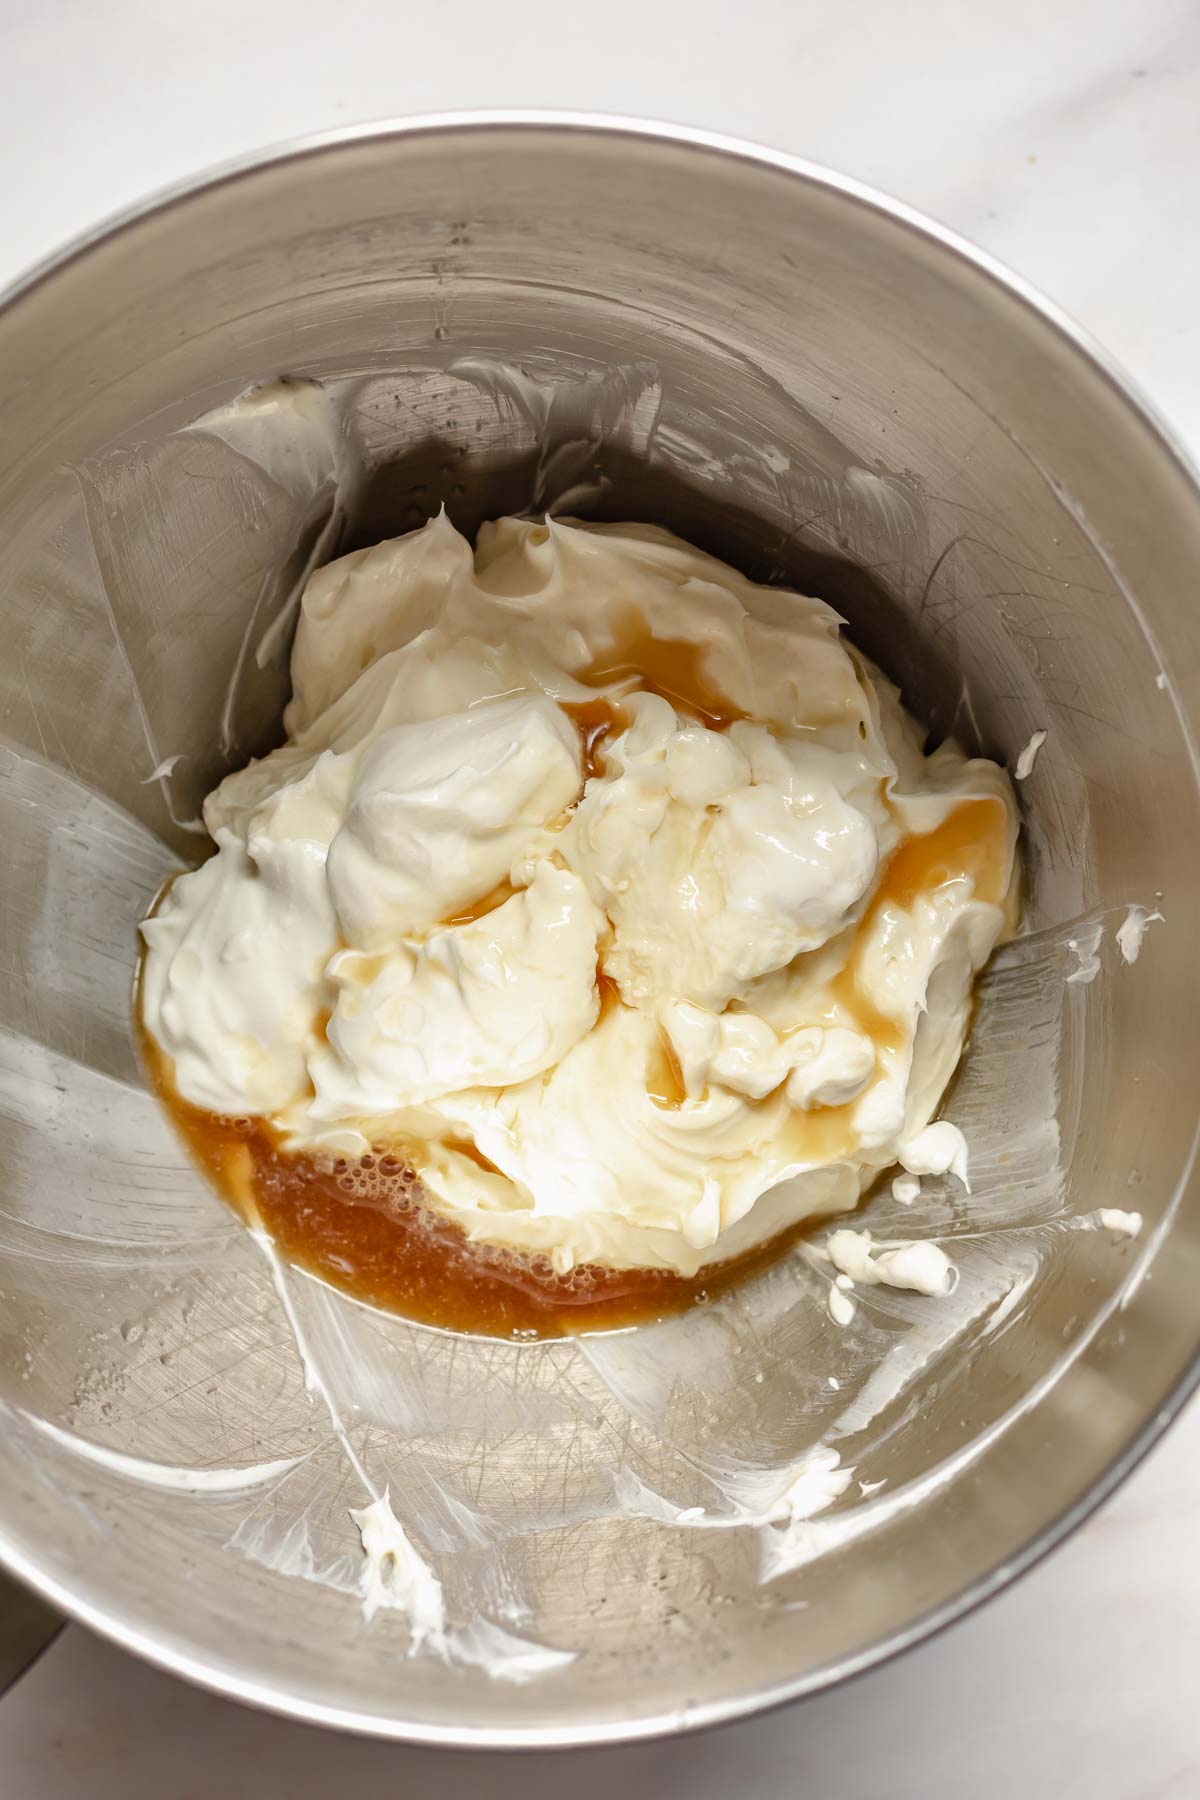 Mixed cream cheese and vanilla in a bowl.